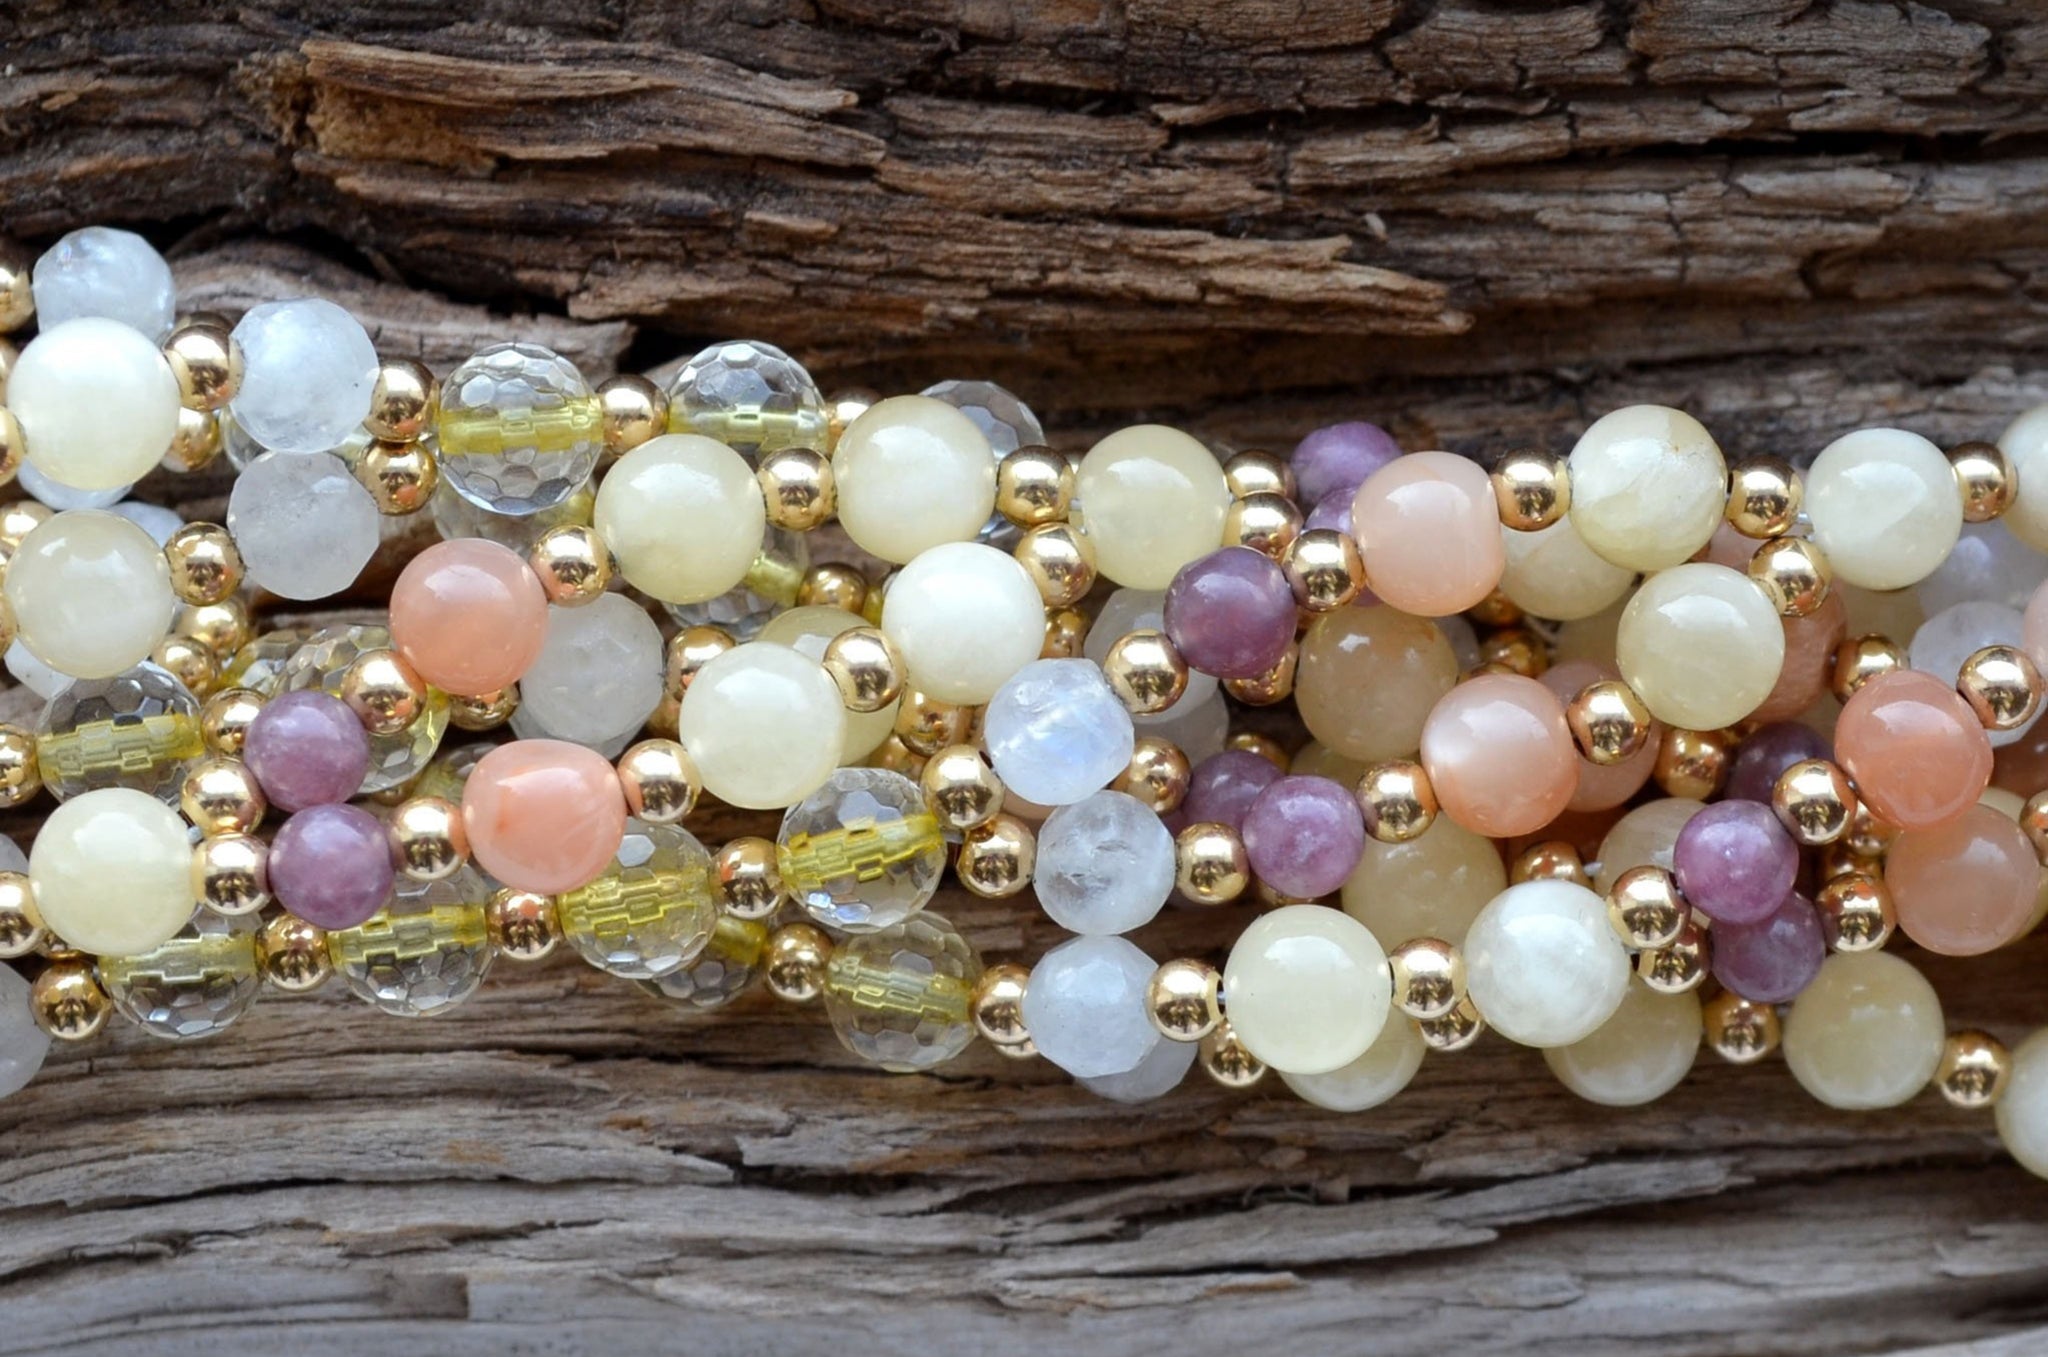 6mm Calcite, 4mm Lepidolite, 6mm Peach Moonstone, 6mm Citrine & 6mm Faceted Moonstone with Gold-Fill